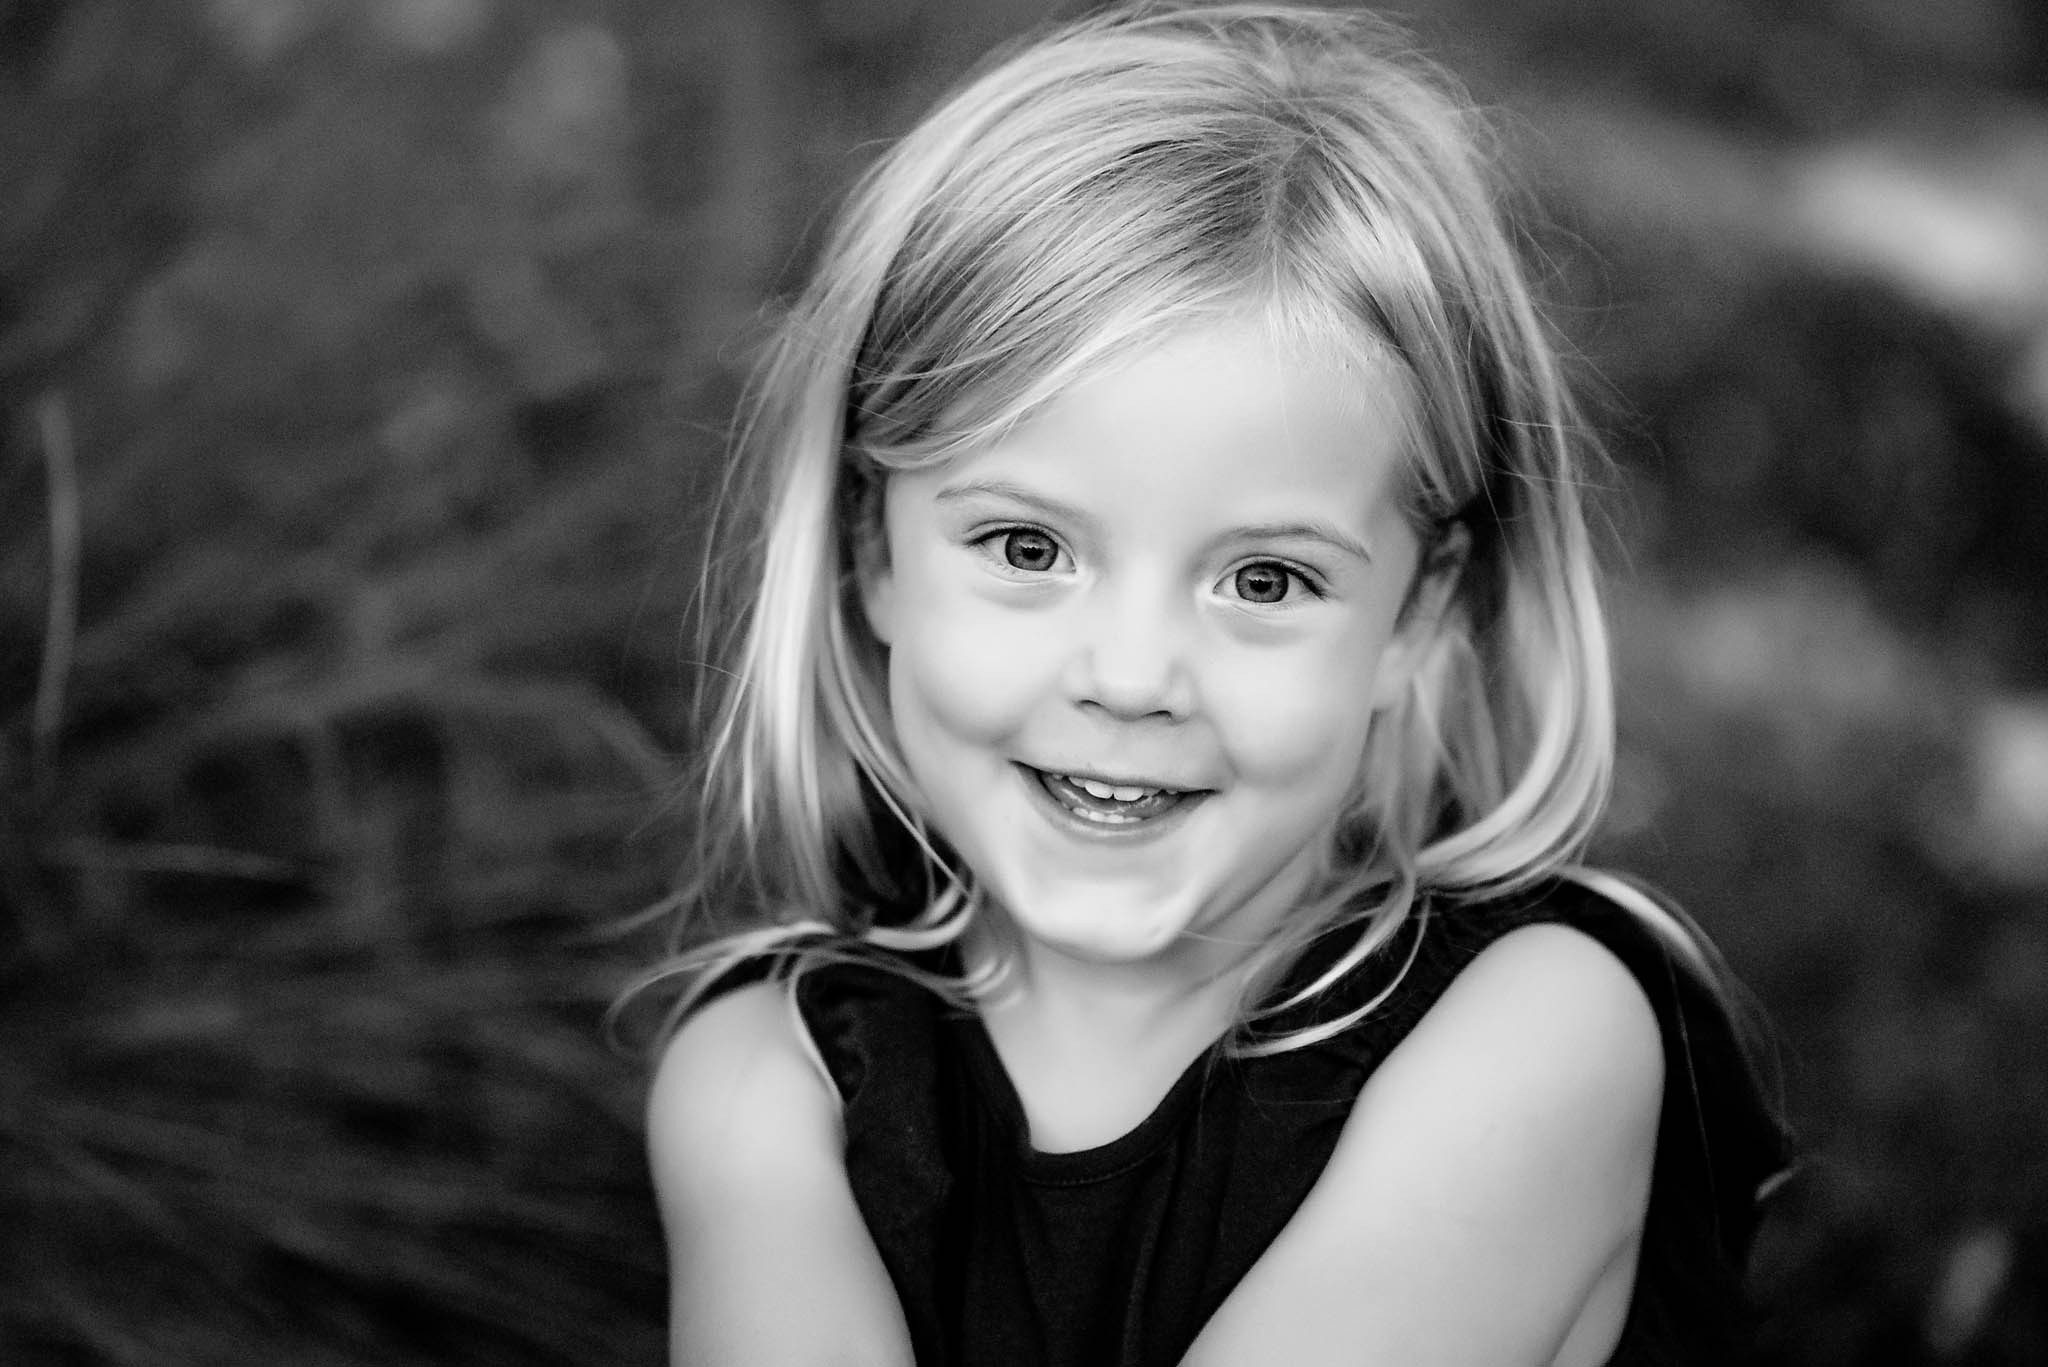 Fun black and white portrait of a little girl smiling and crossing her arms